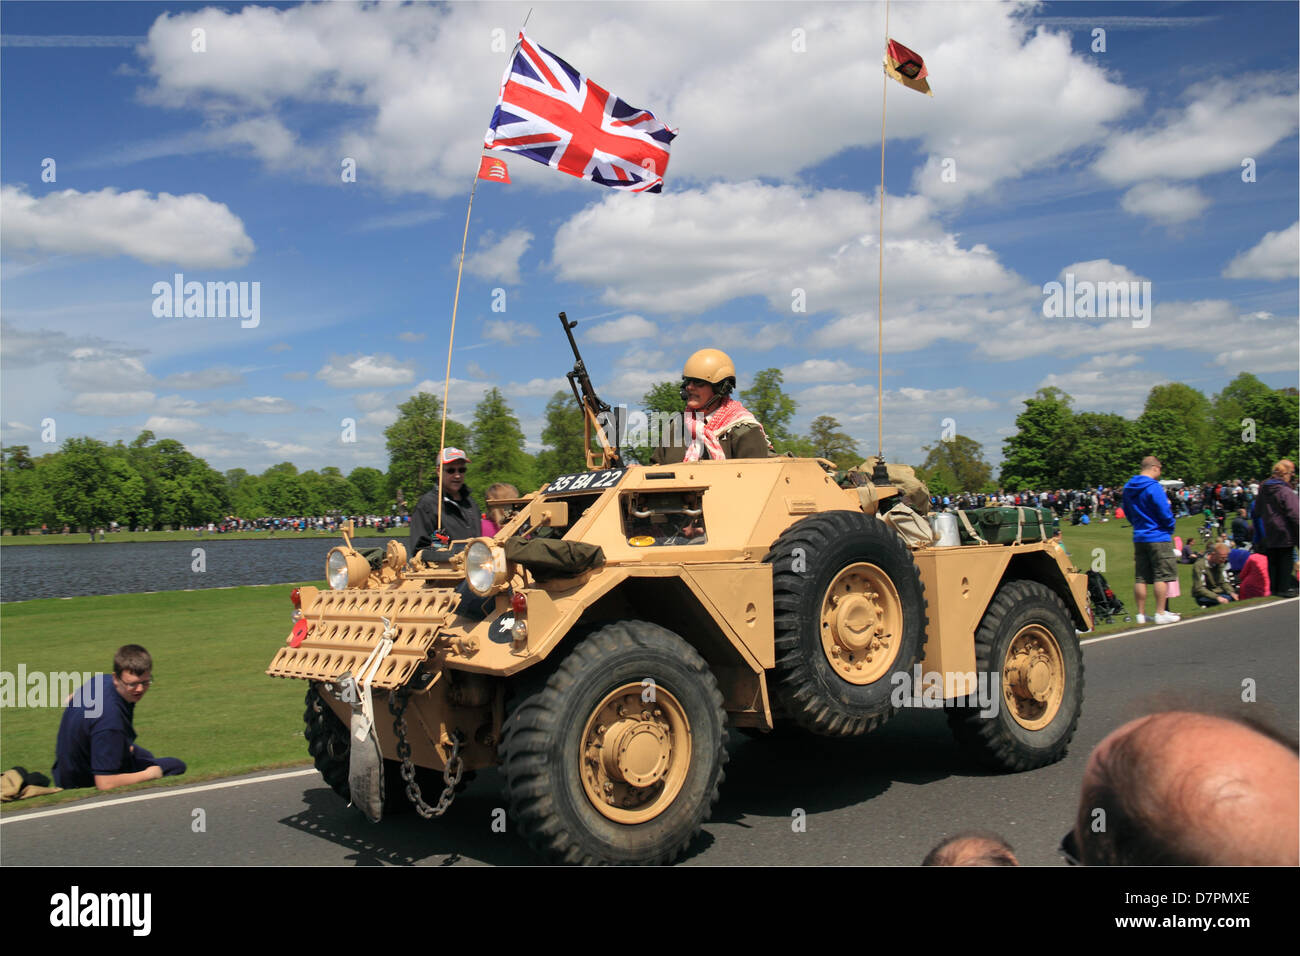 Daimler Ferret Mk1 Scout Car Liaison (1953), 10th Royal Hussars. Chestnut Sunday. Bushy Park, Hampton Court, London, UK. Sunday 12th May 2013. Vintage and classic vehicle parade and display with fairground attractions and military re-enactments. Credit: Ian Bottle/ Alamy Live News Stock Photo